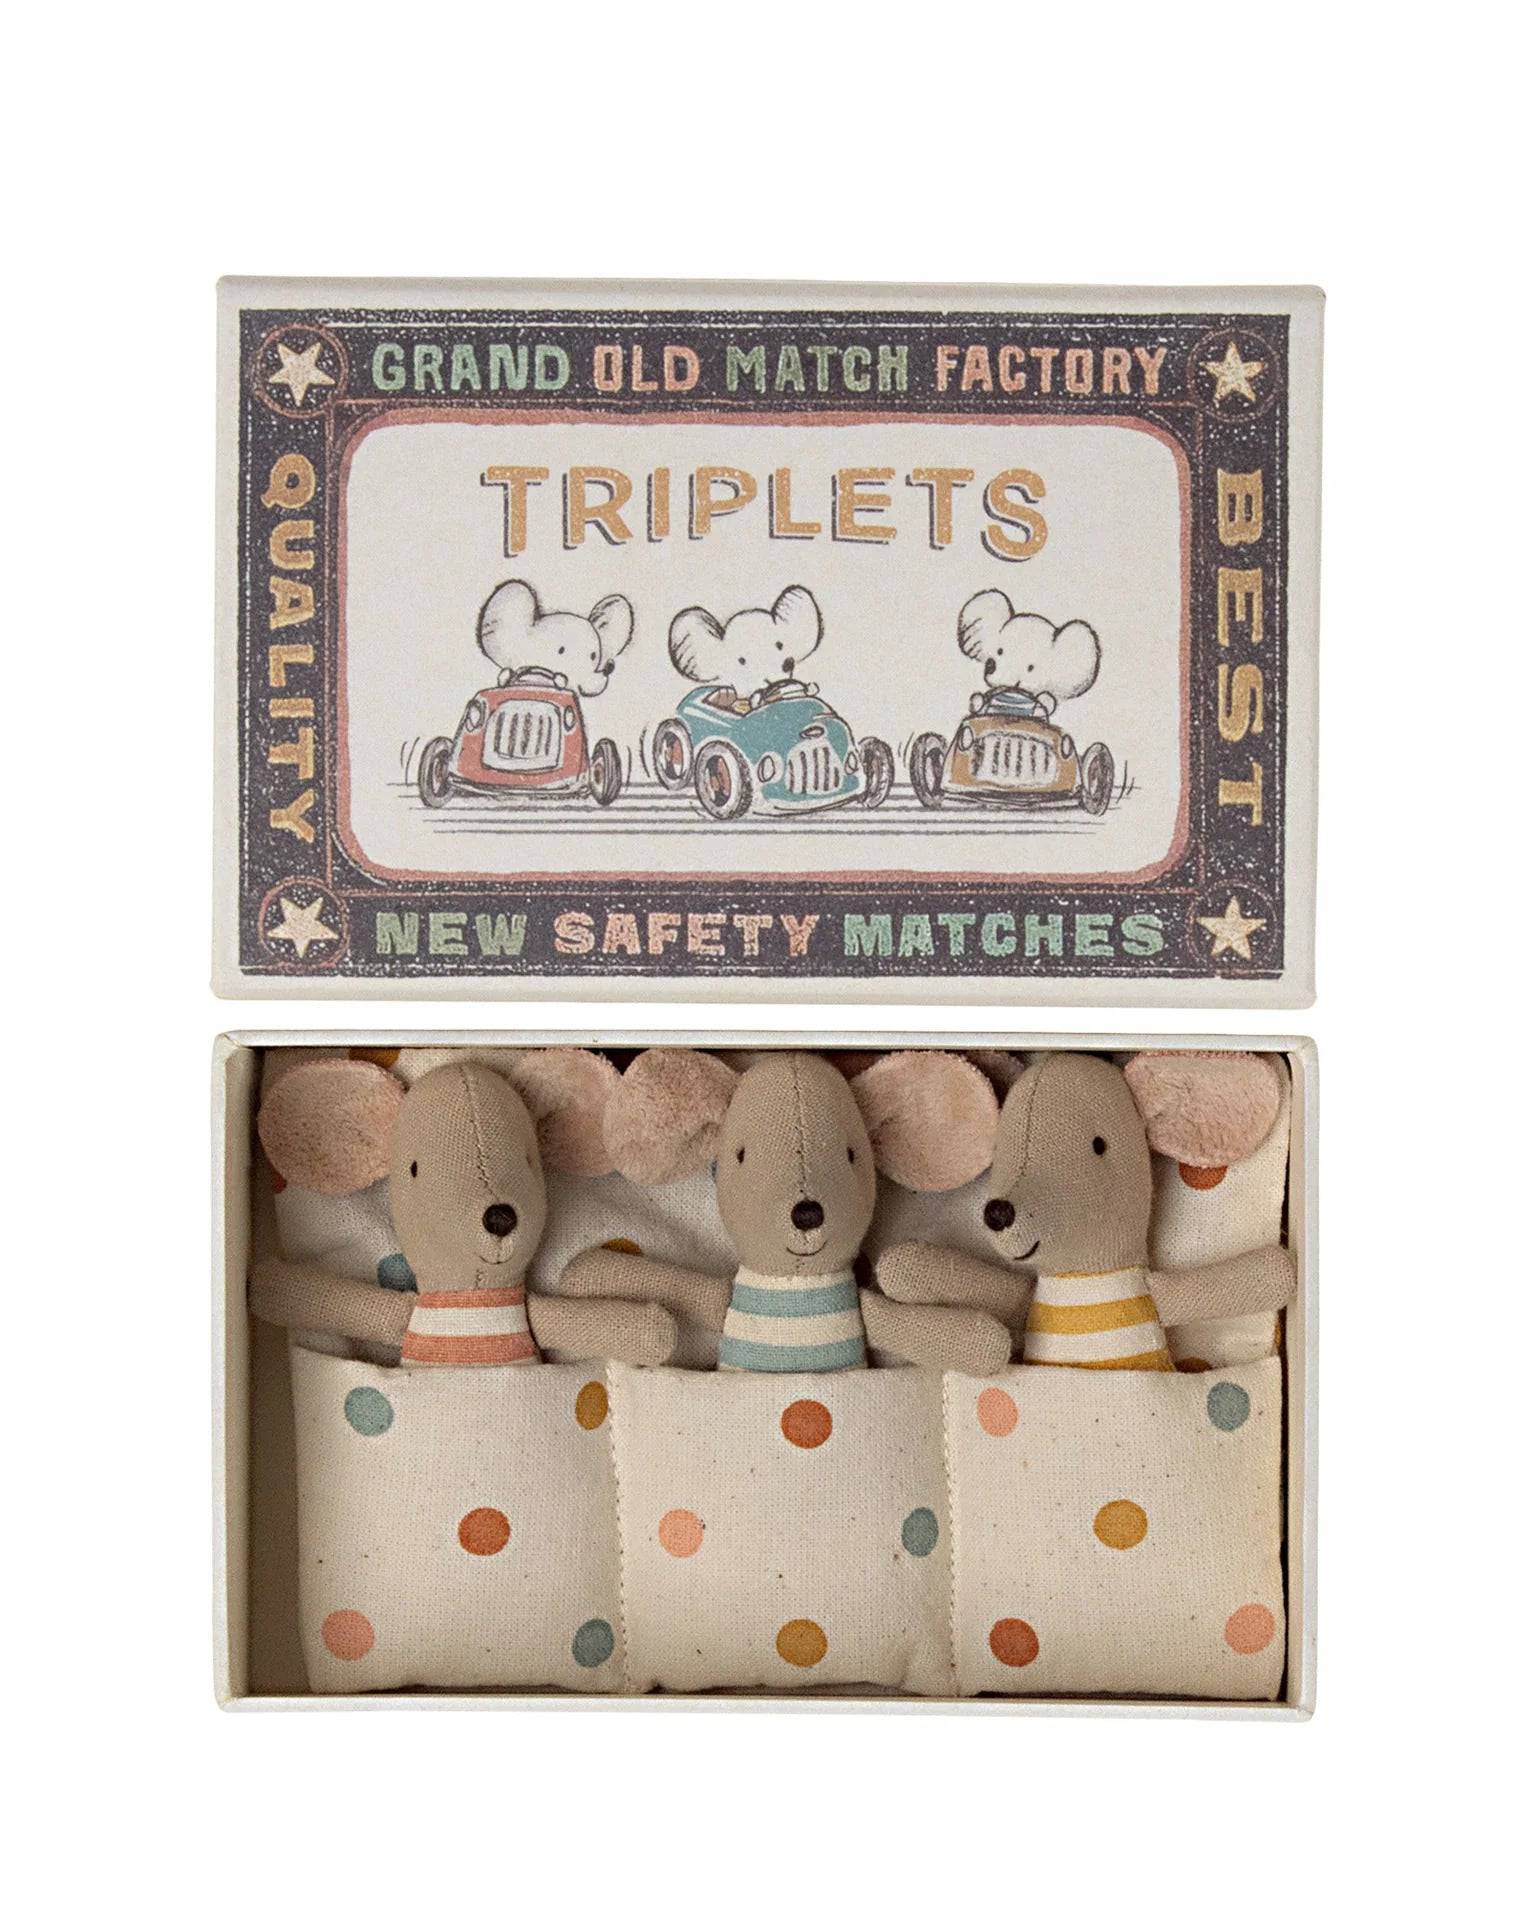 Triplets Baby Mice - A Child's Delight